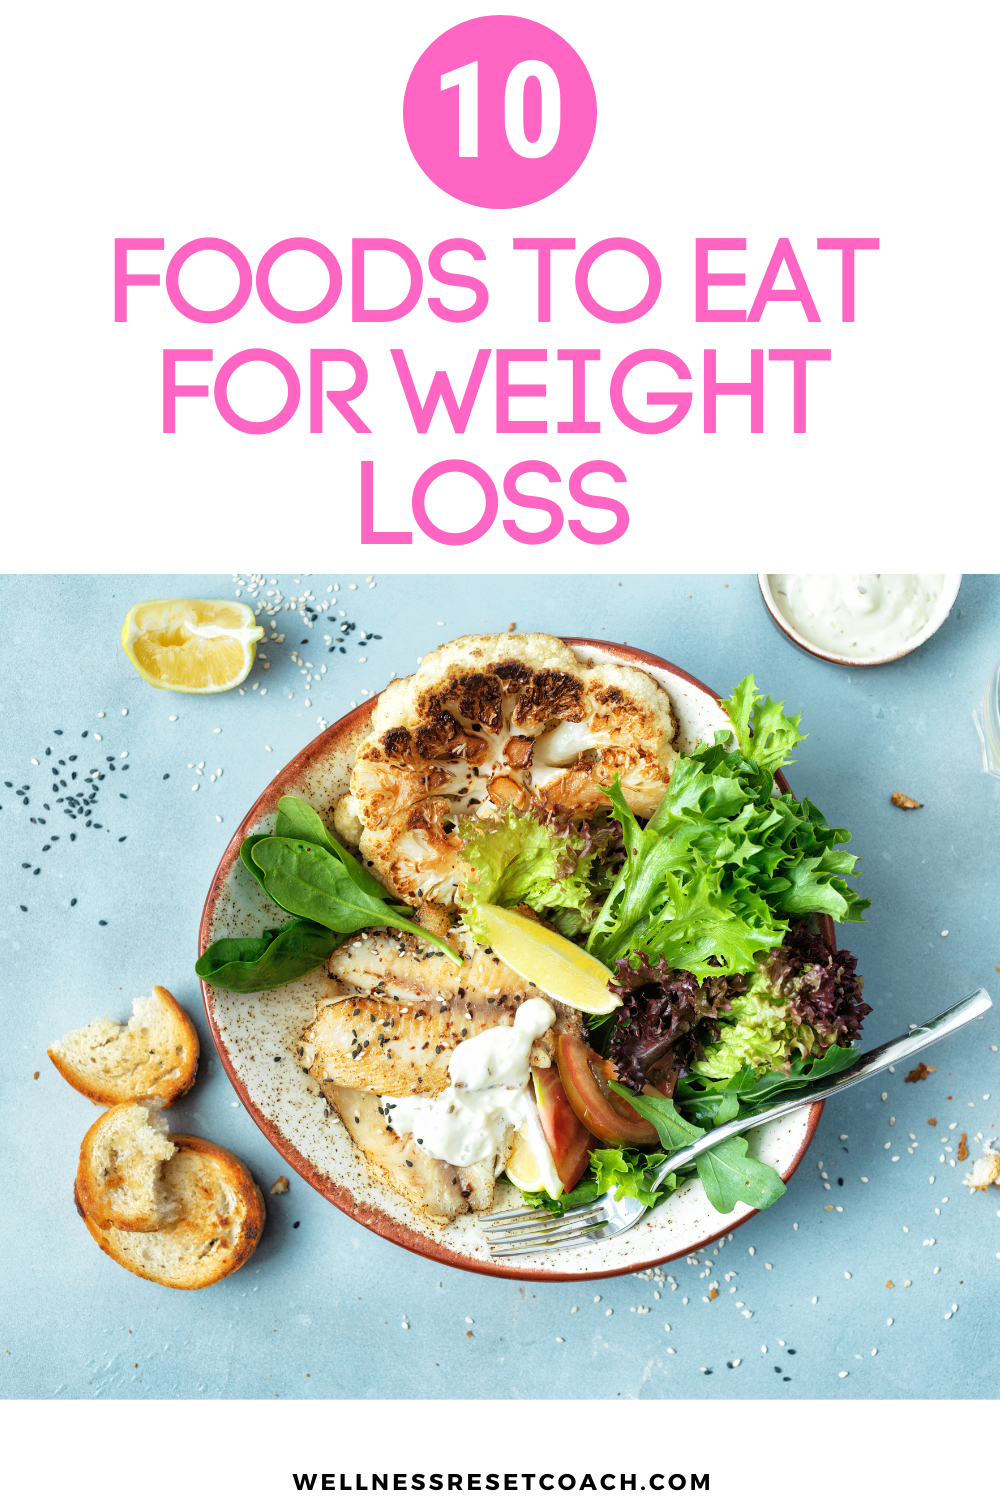 10 Foods to Eat for Rapid Weight Loss - Wellness Reset